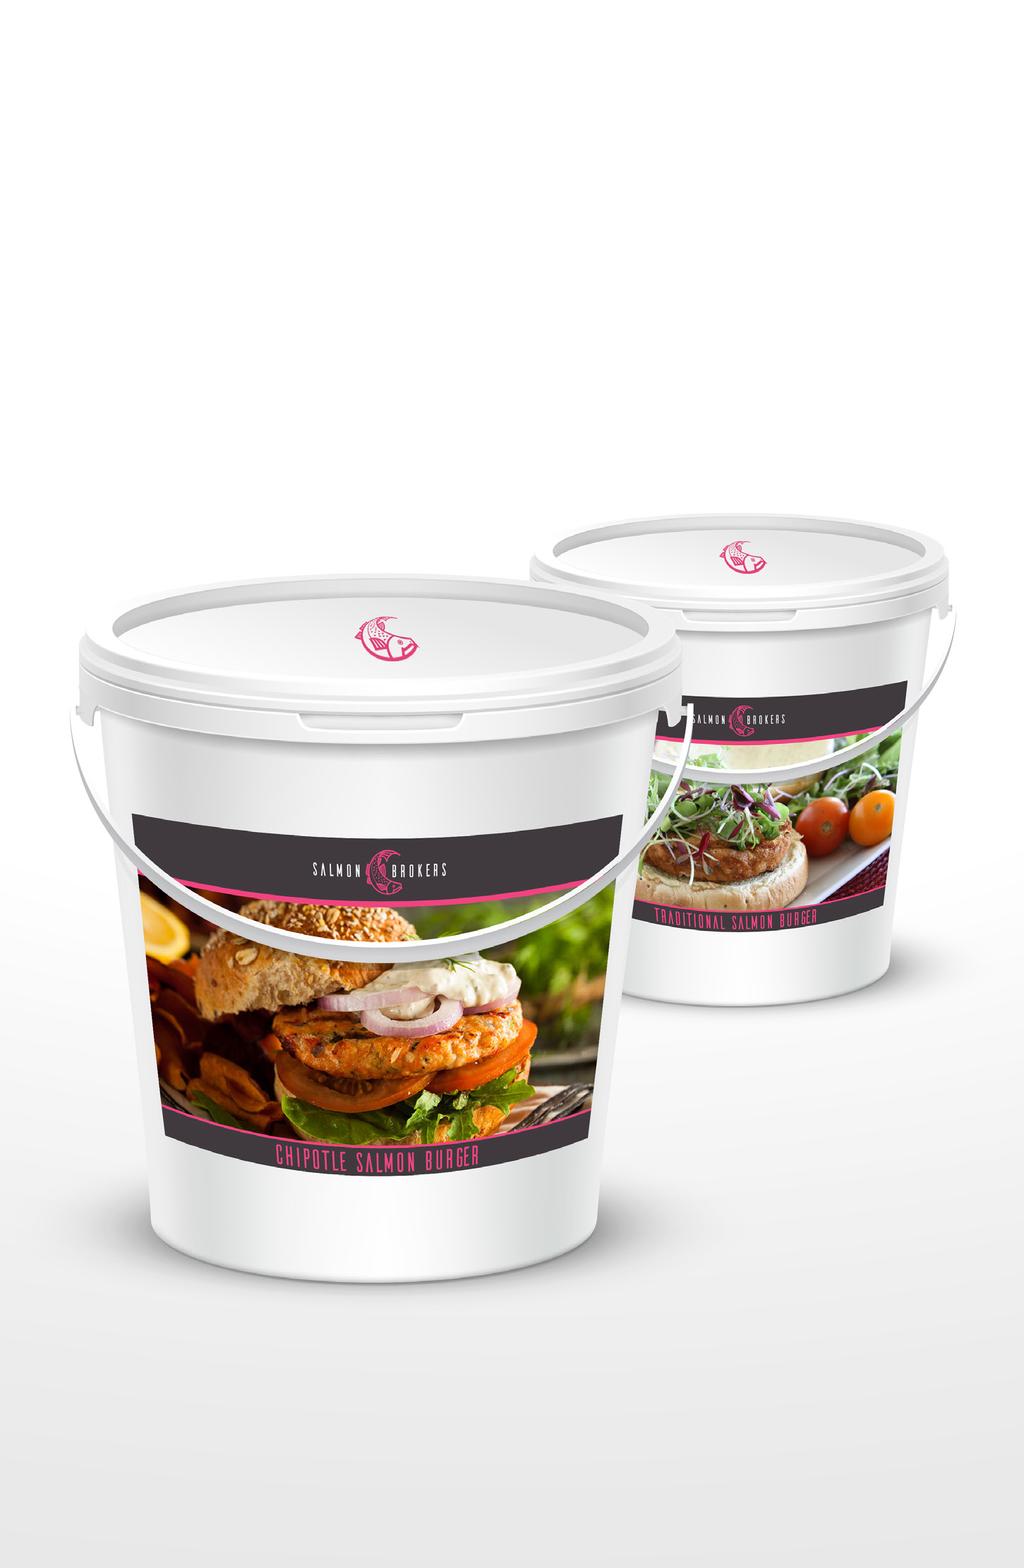 NOW AVAILABLE IN TUBS Discover the burger revolution in bulk including the new Chipotle and Traditional Salmon Burger